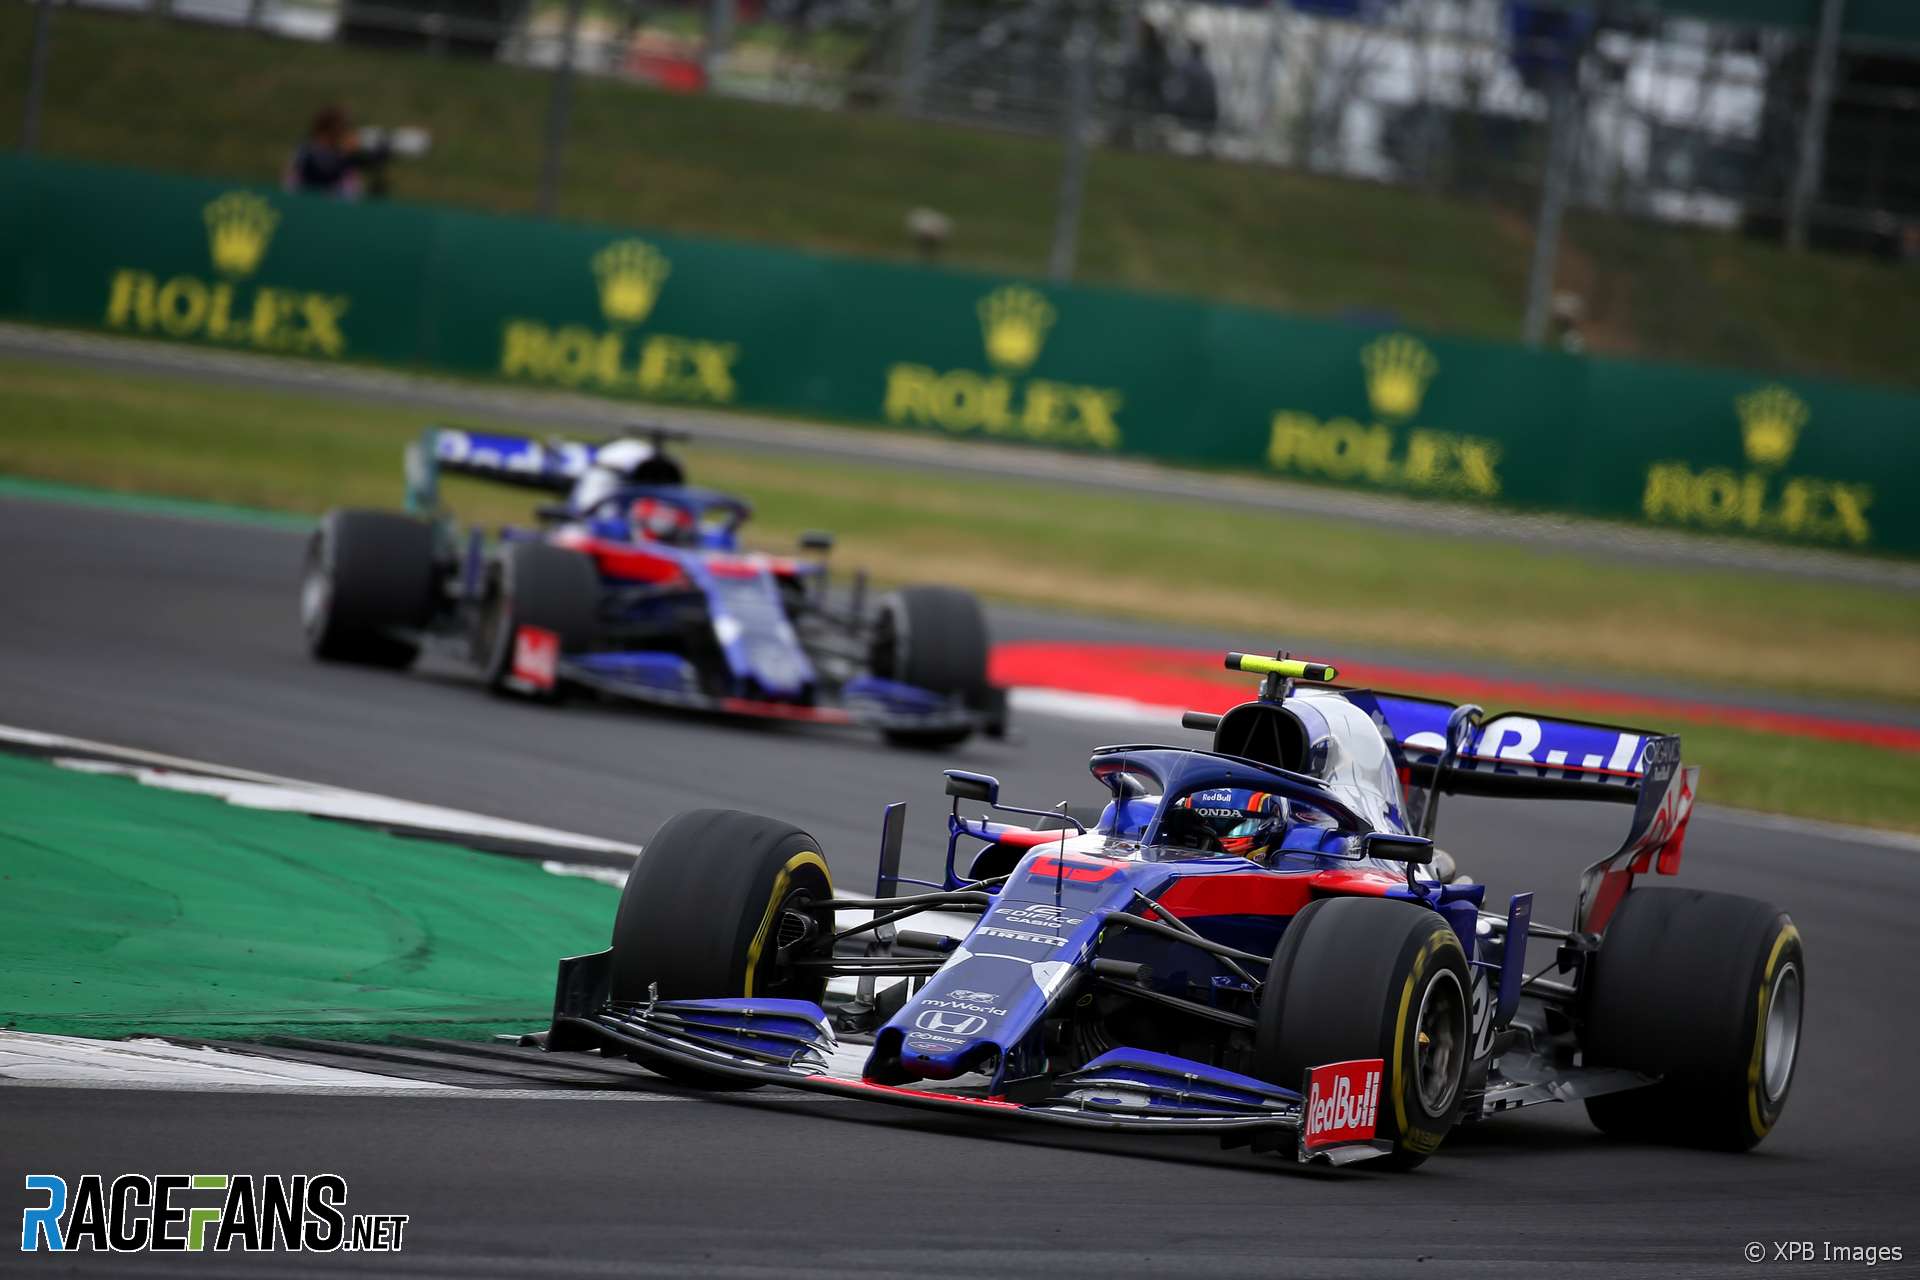 High voltage safety warning meant Albon couldn’t pit